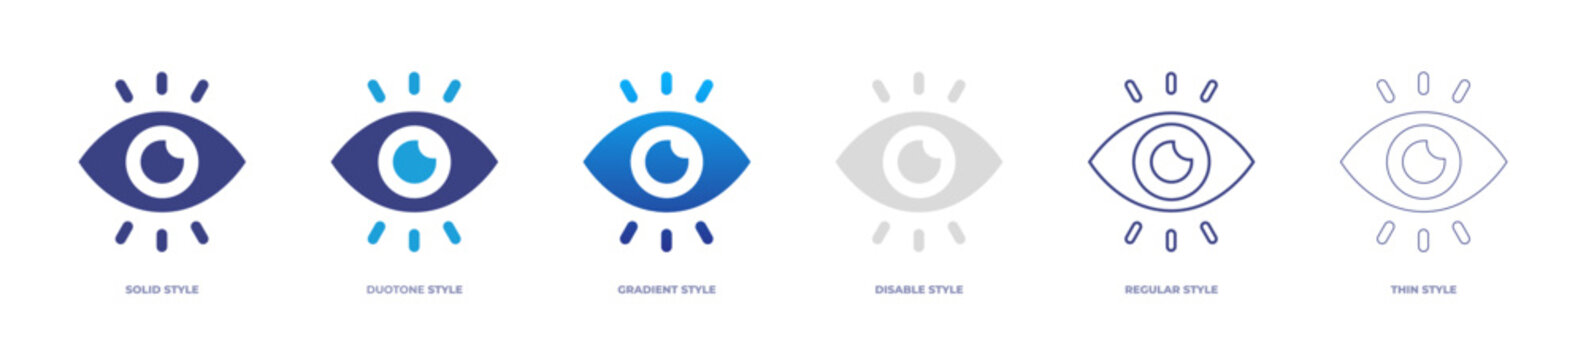 Look icon set full style. Solid, disable, gradient, duotone, regular, thin. Vector illustration and transparent icon.
